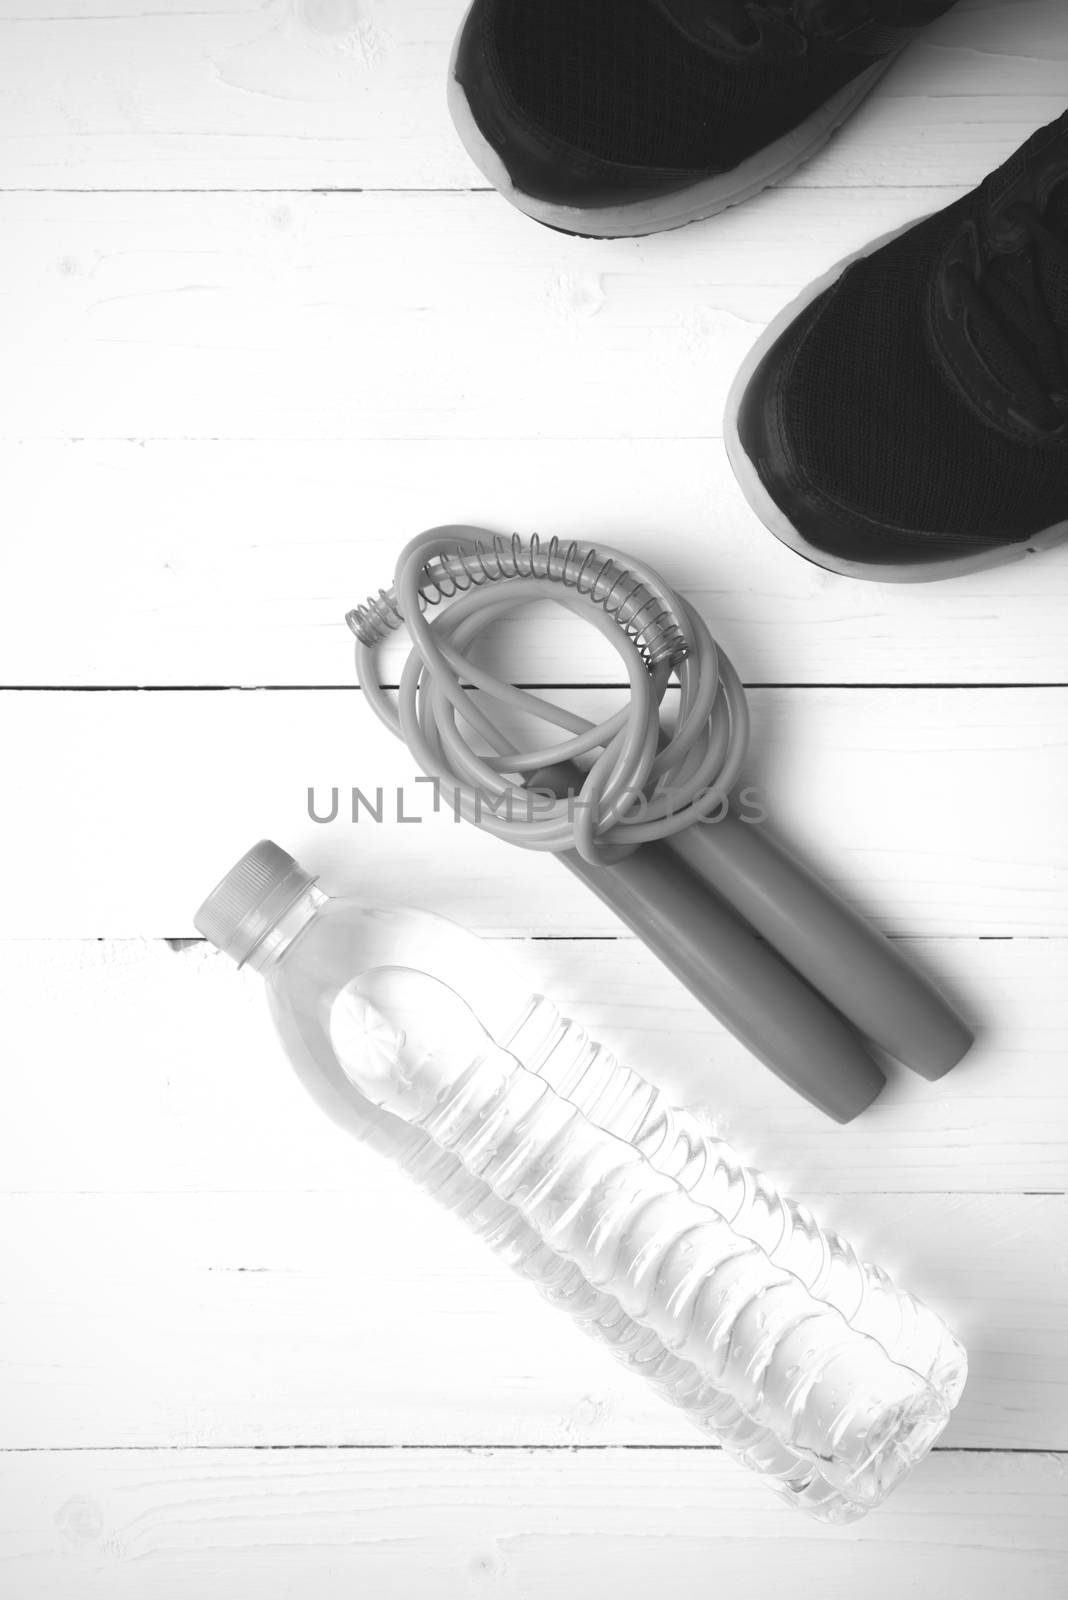 fitness equipment : running shoes,jumping rope and water bottle on white wood table black and white color tone style